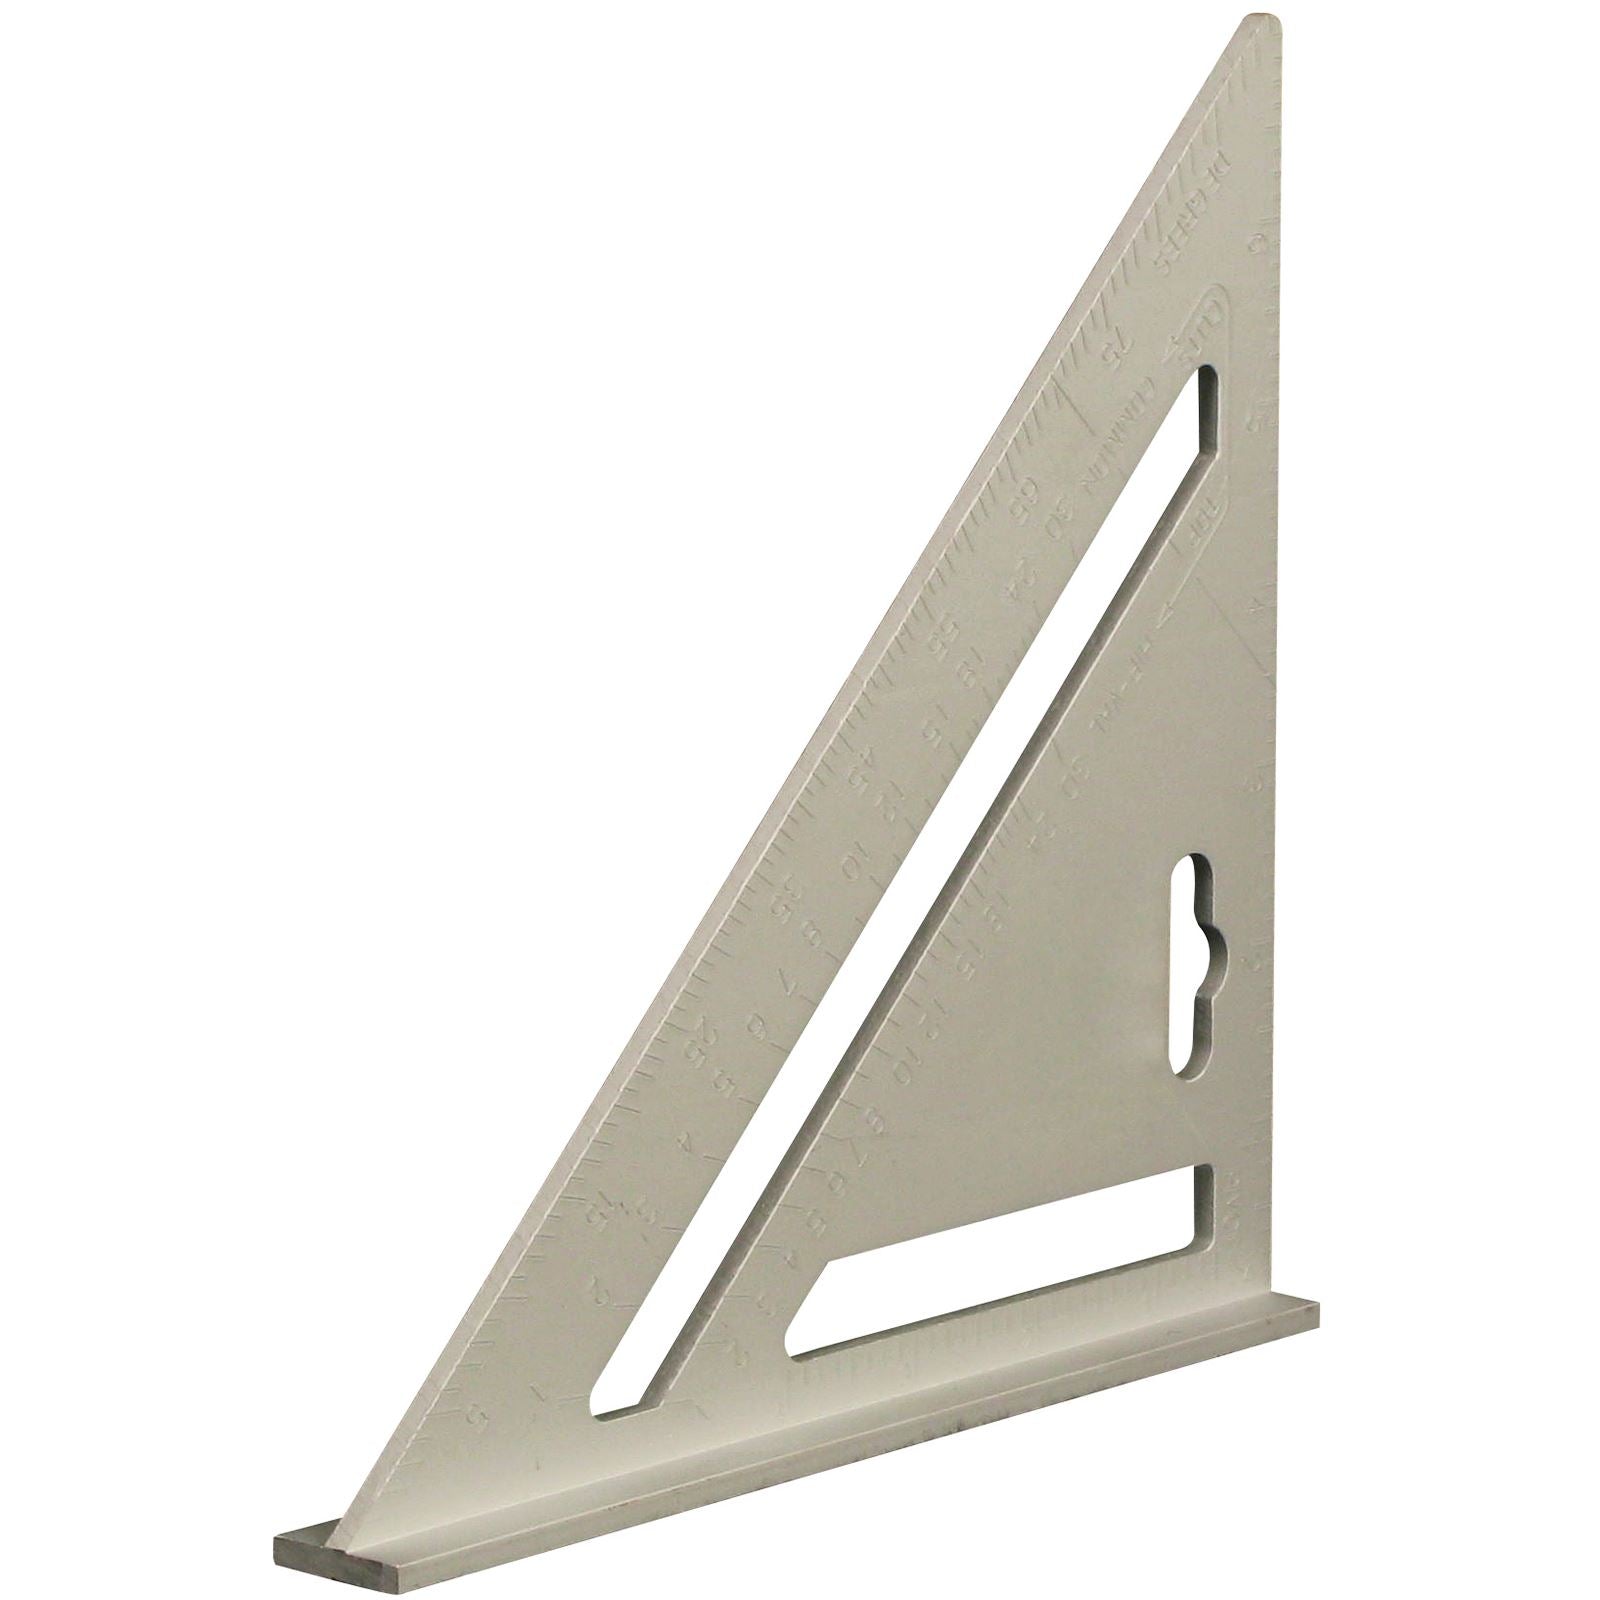 Silverline 7" Heavy Duty Aluminium Alloy Roofing Rafter Square Framing Roof